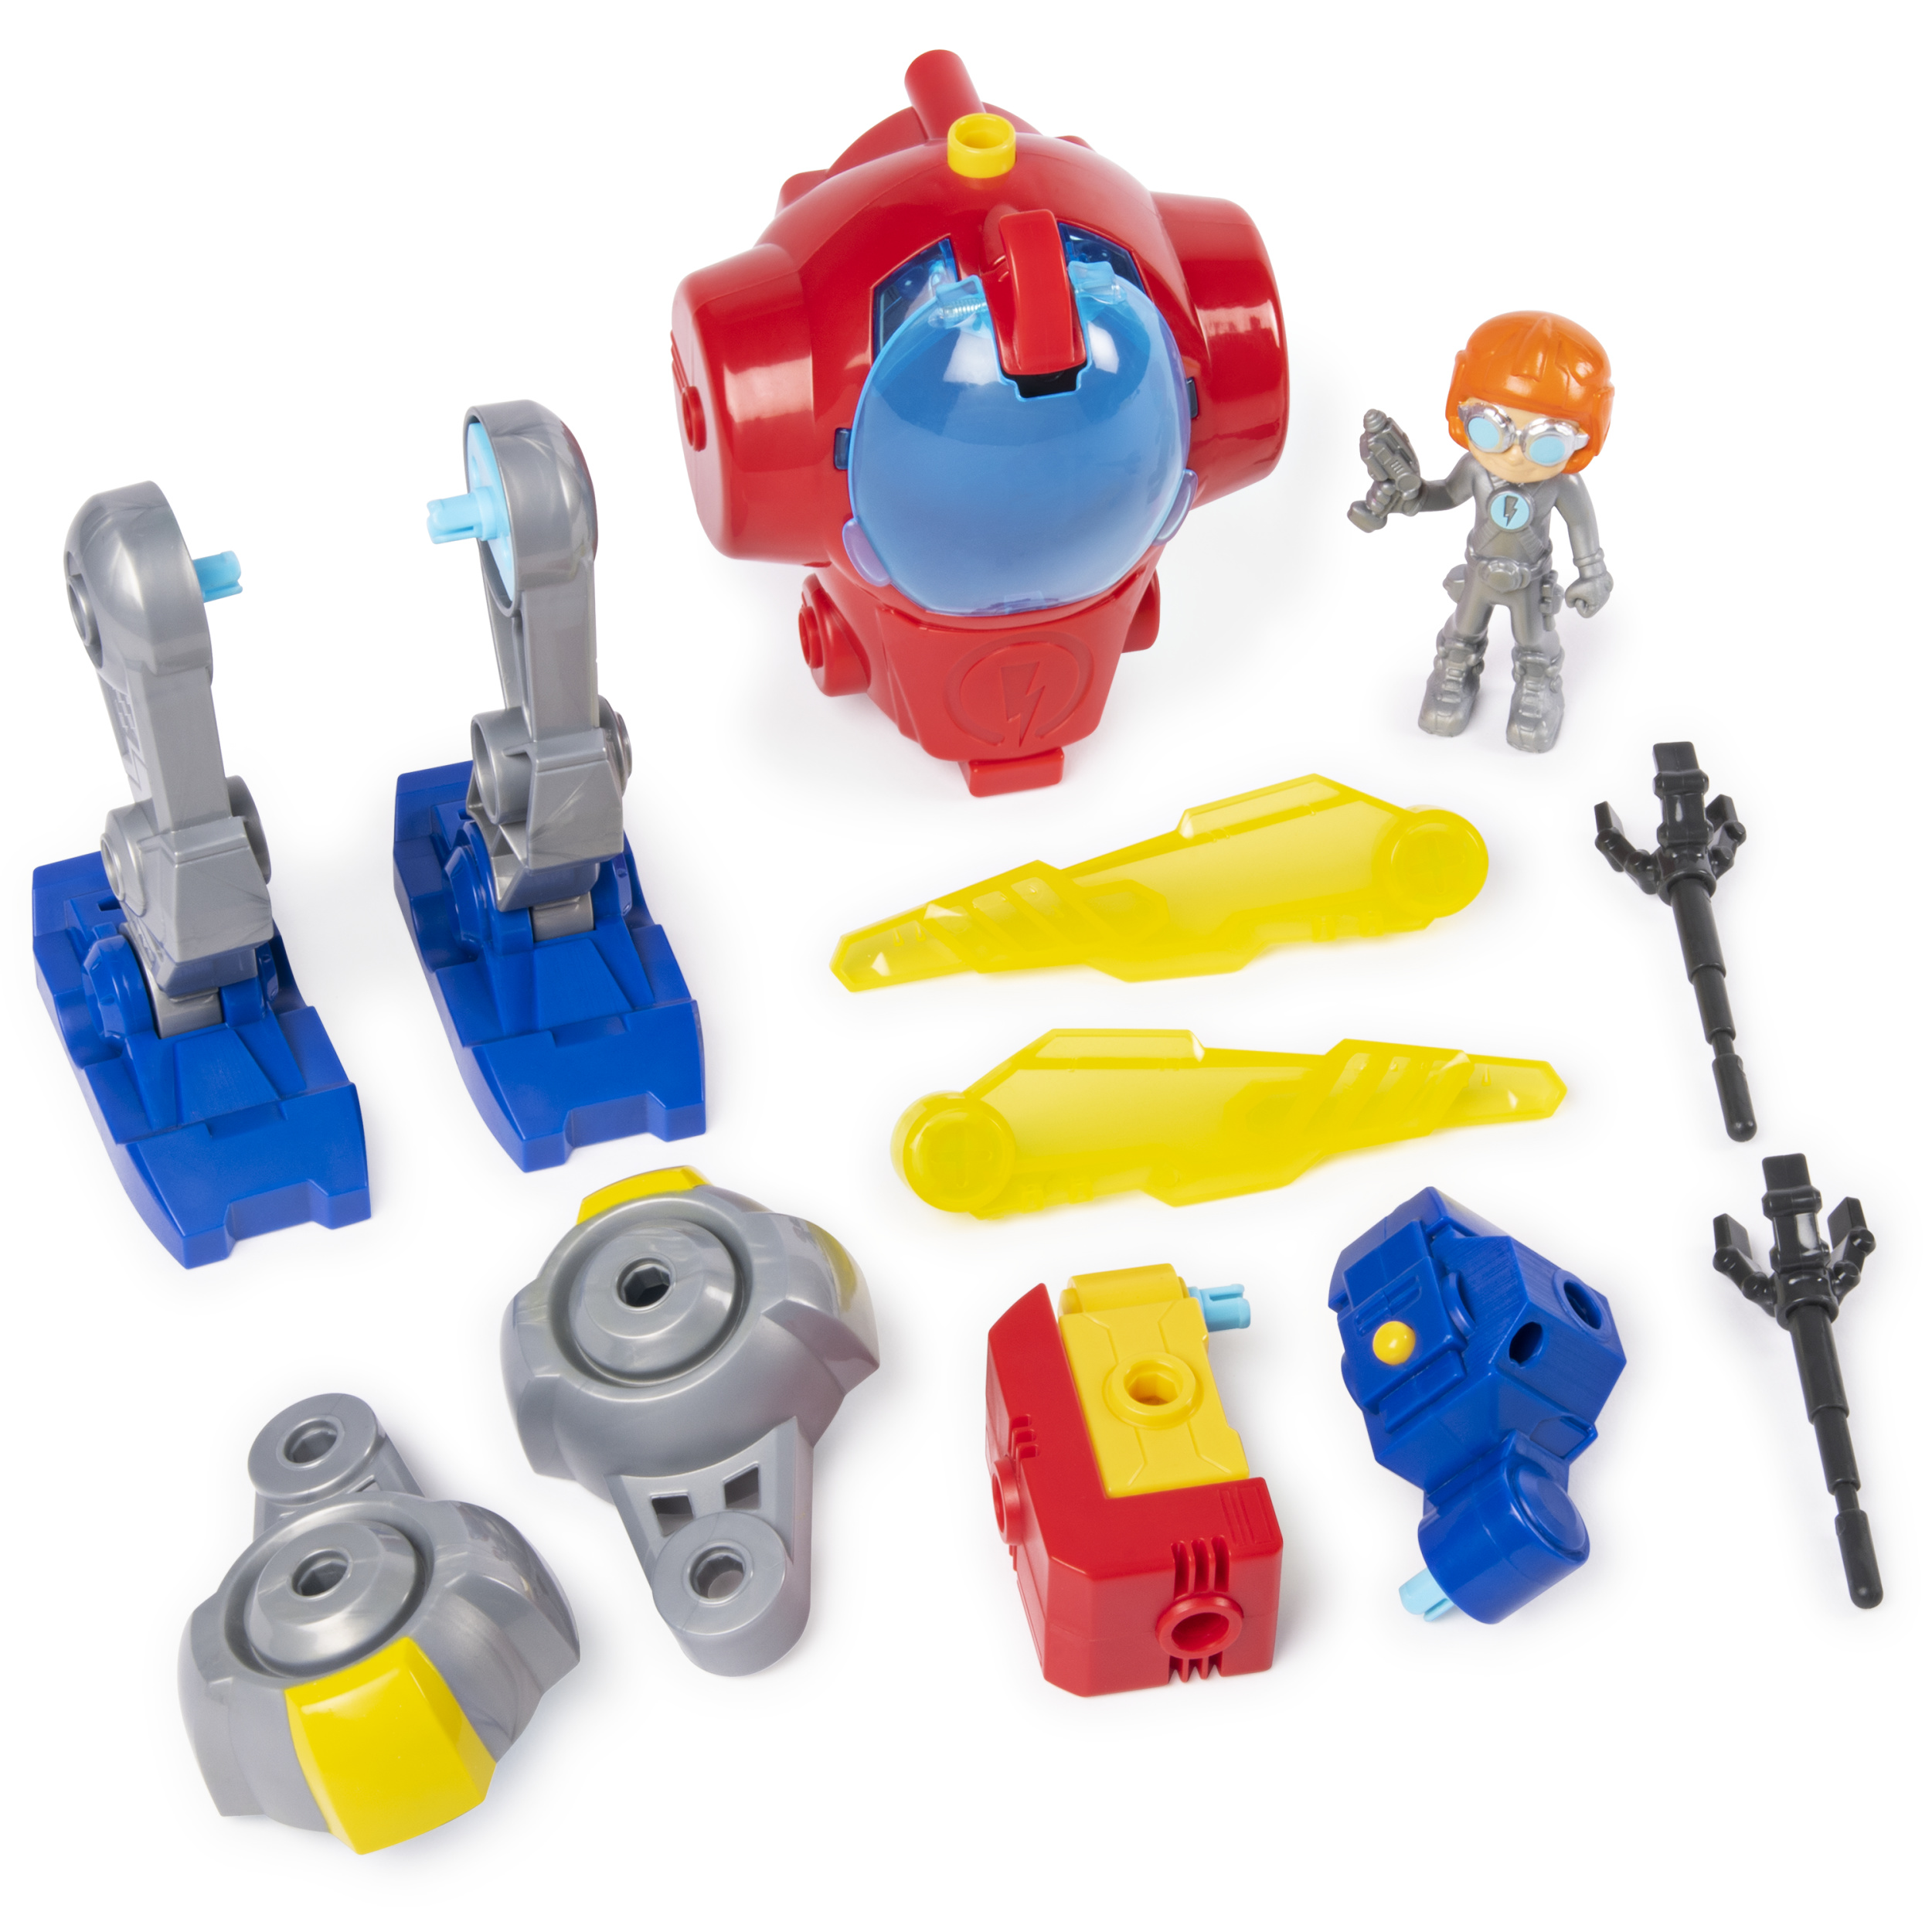 Rusty Rivets, Mechsuit, Snap'n Build Construction with Lights, Sounds, and Rusty Figure, for Ages 3 and up - image 3 of 8